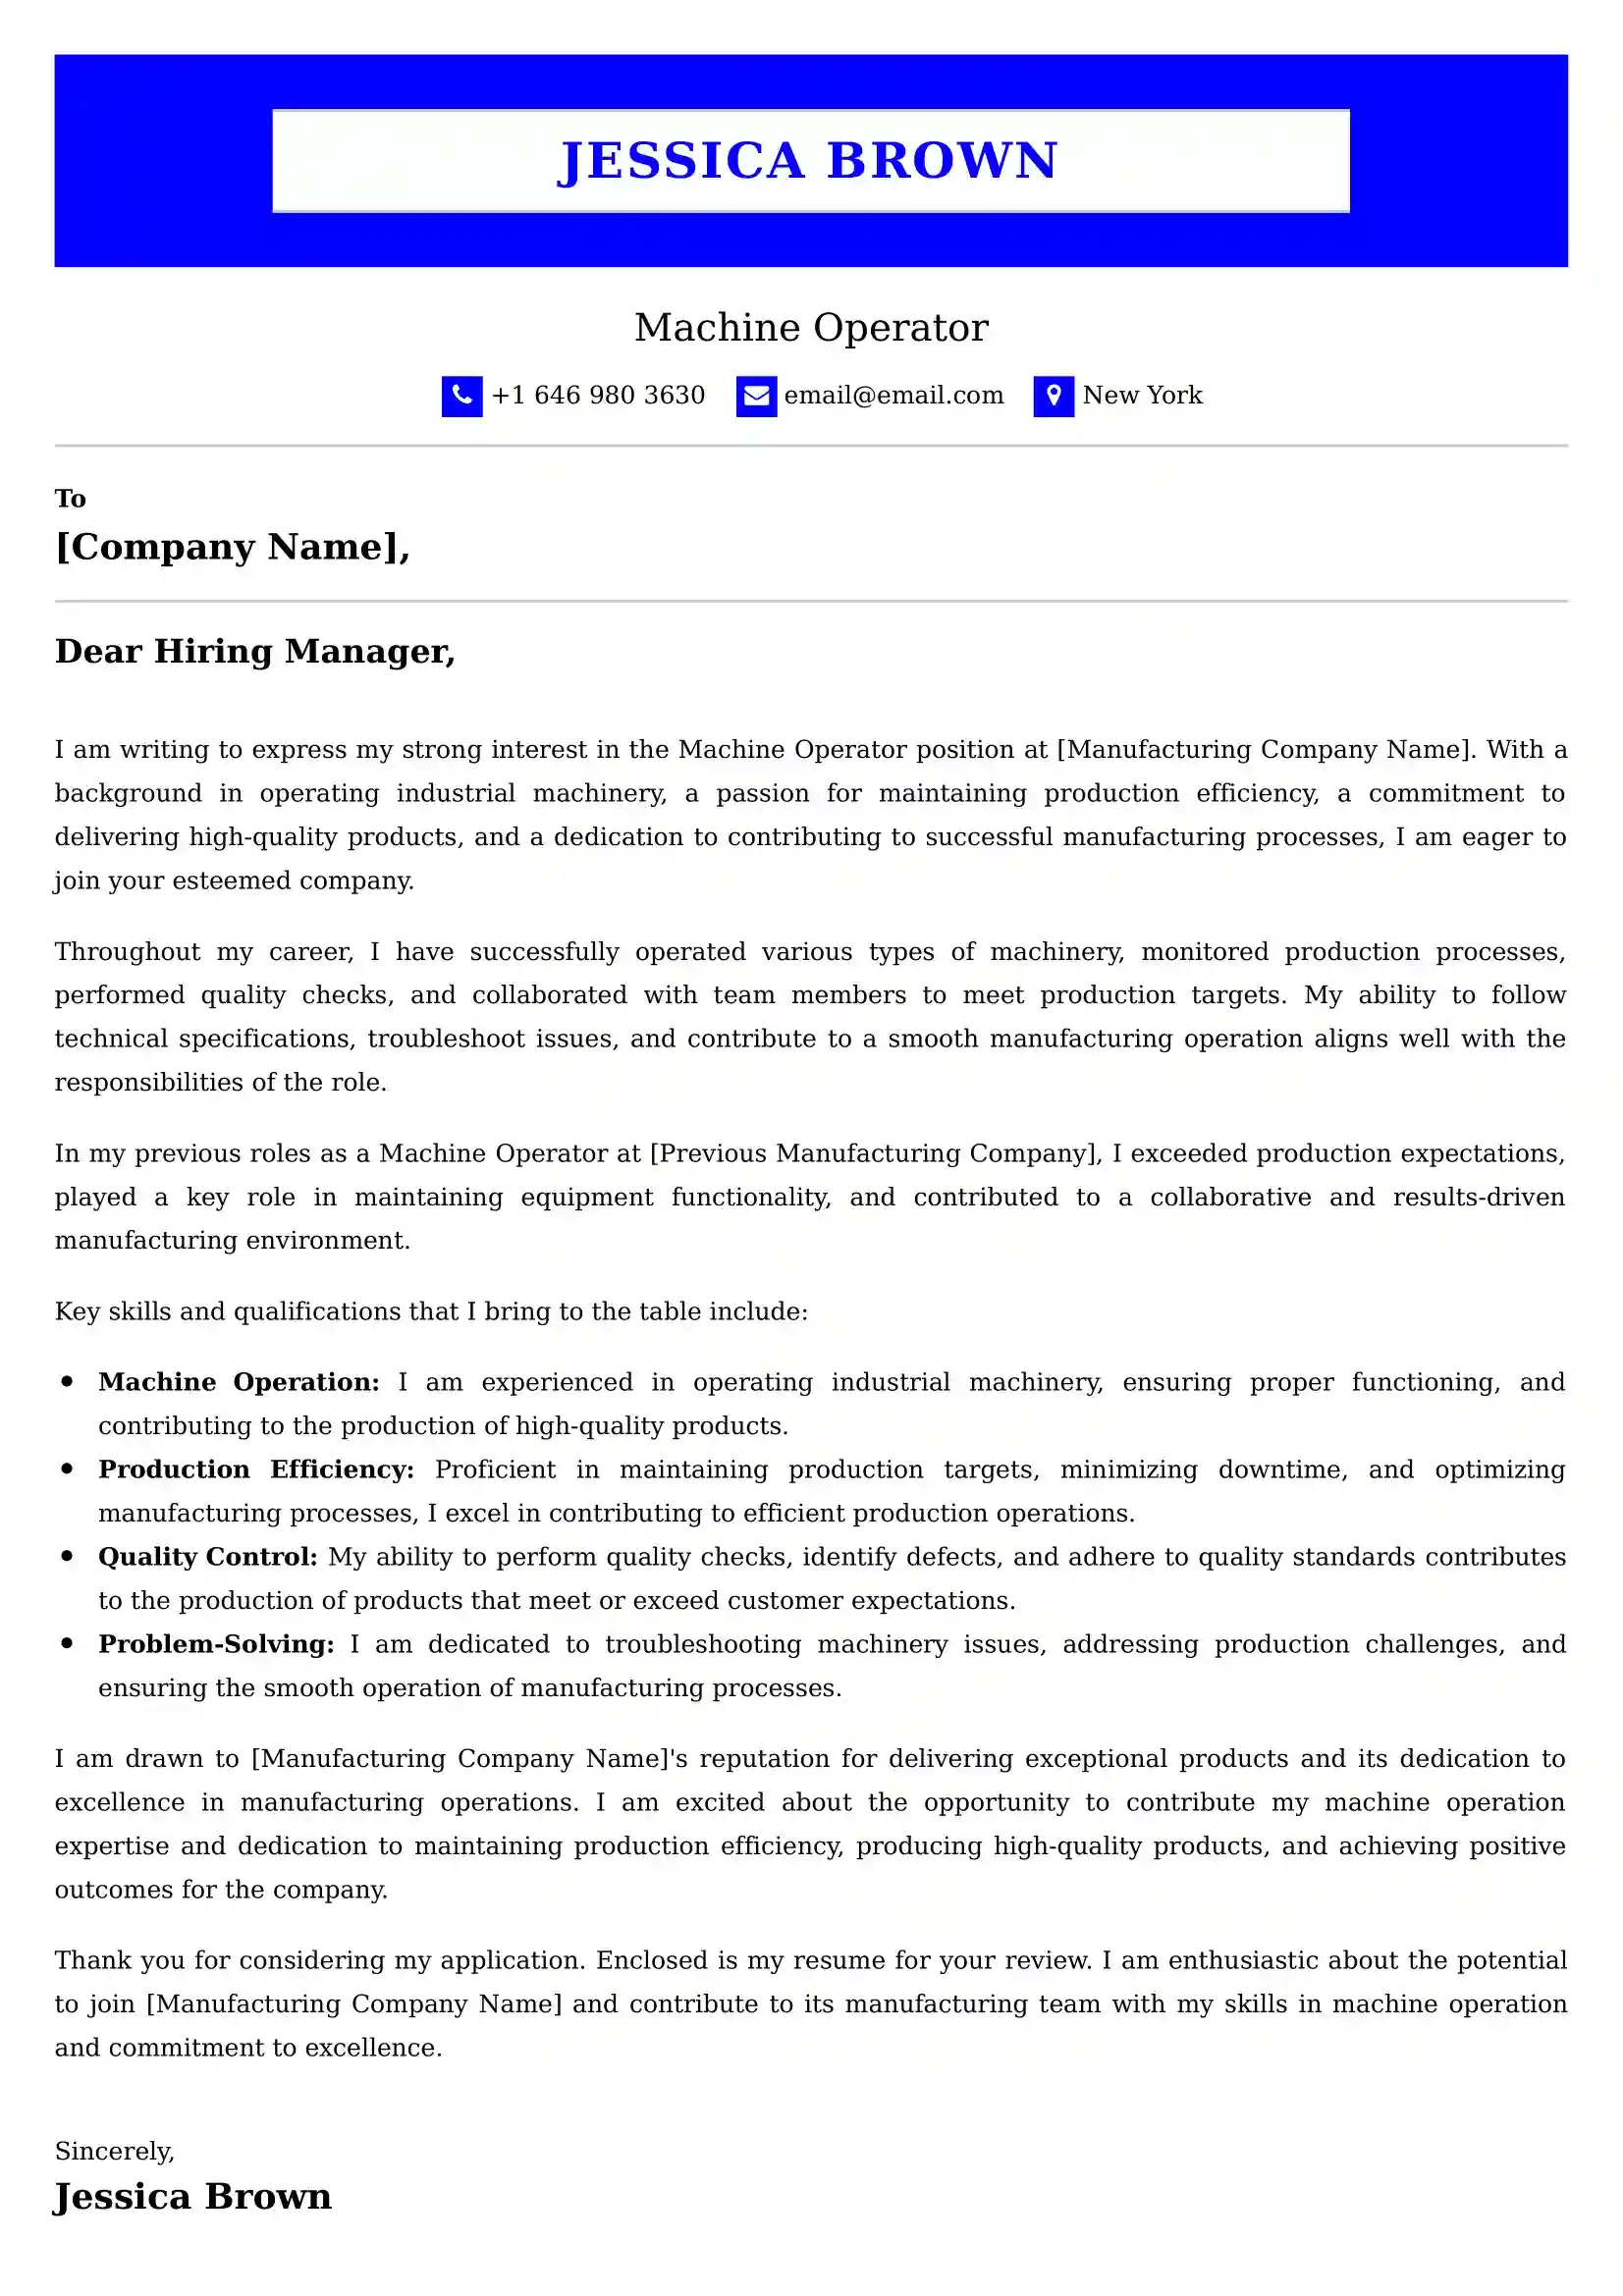 Machine Operator Cover Letter Examples - Latest UK Format